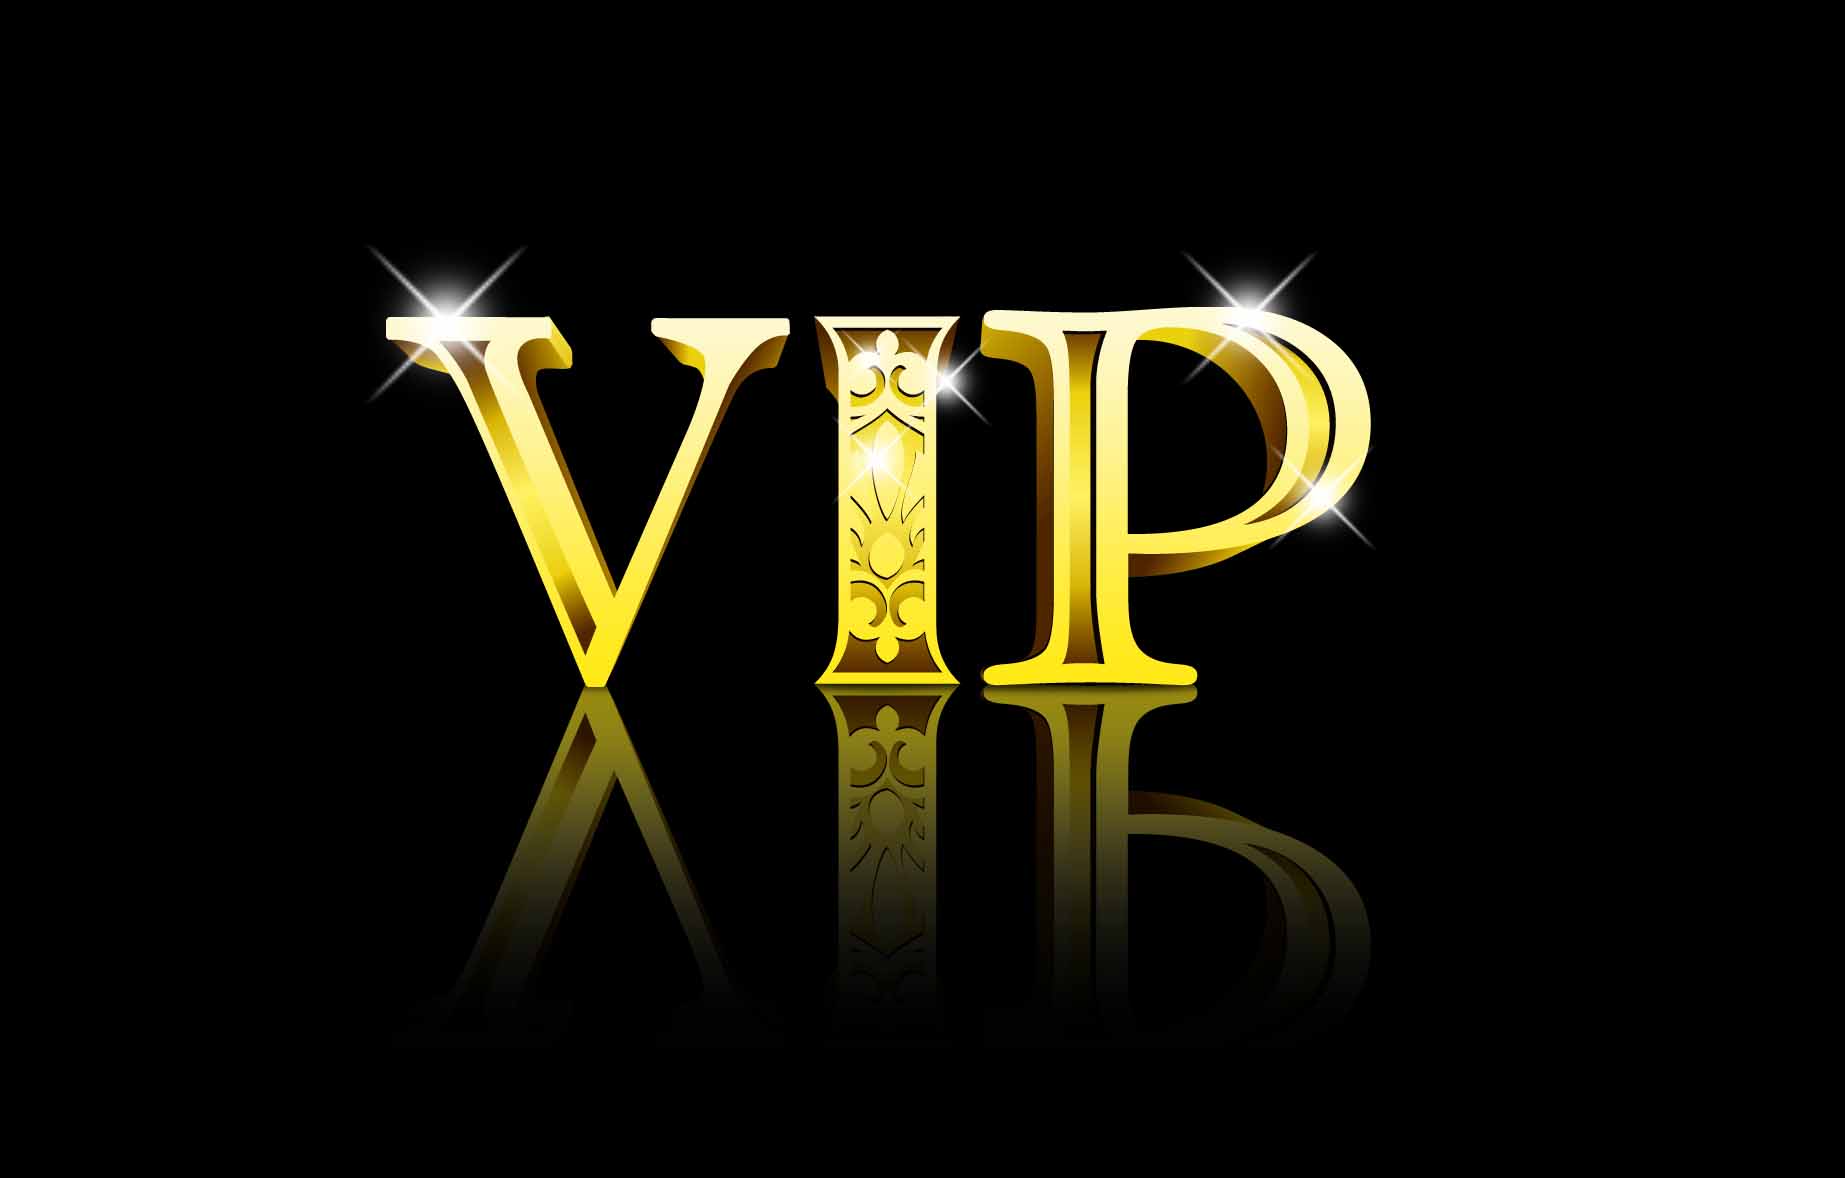 VIP(貴賓(very important person))